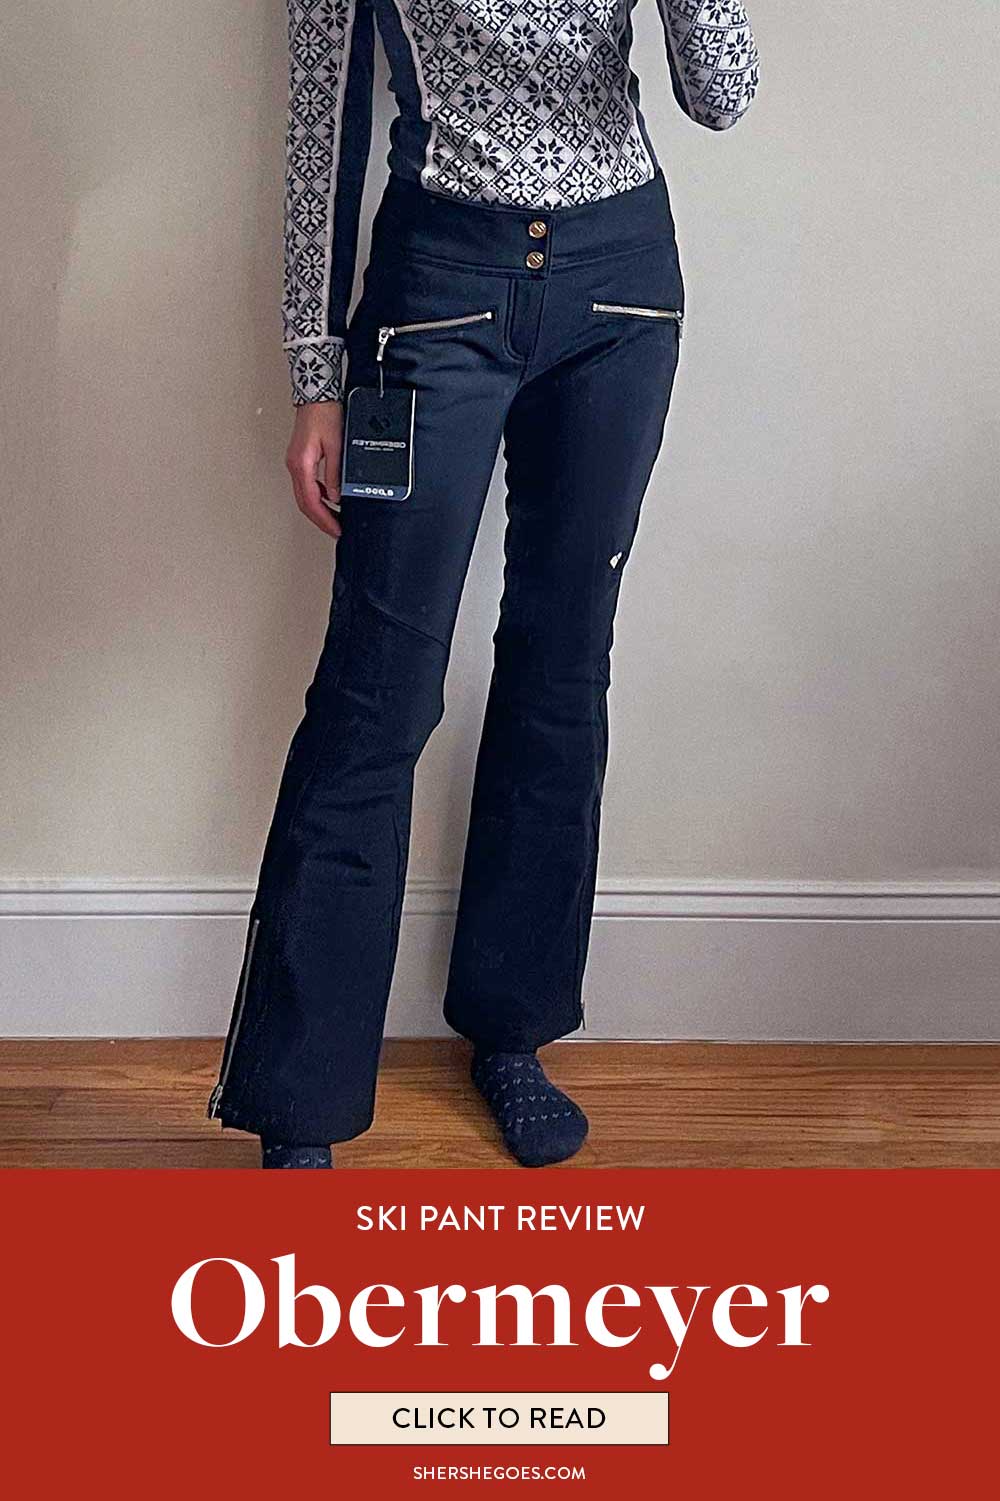 obermeyer-fitted-ski-pants-review